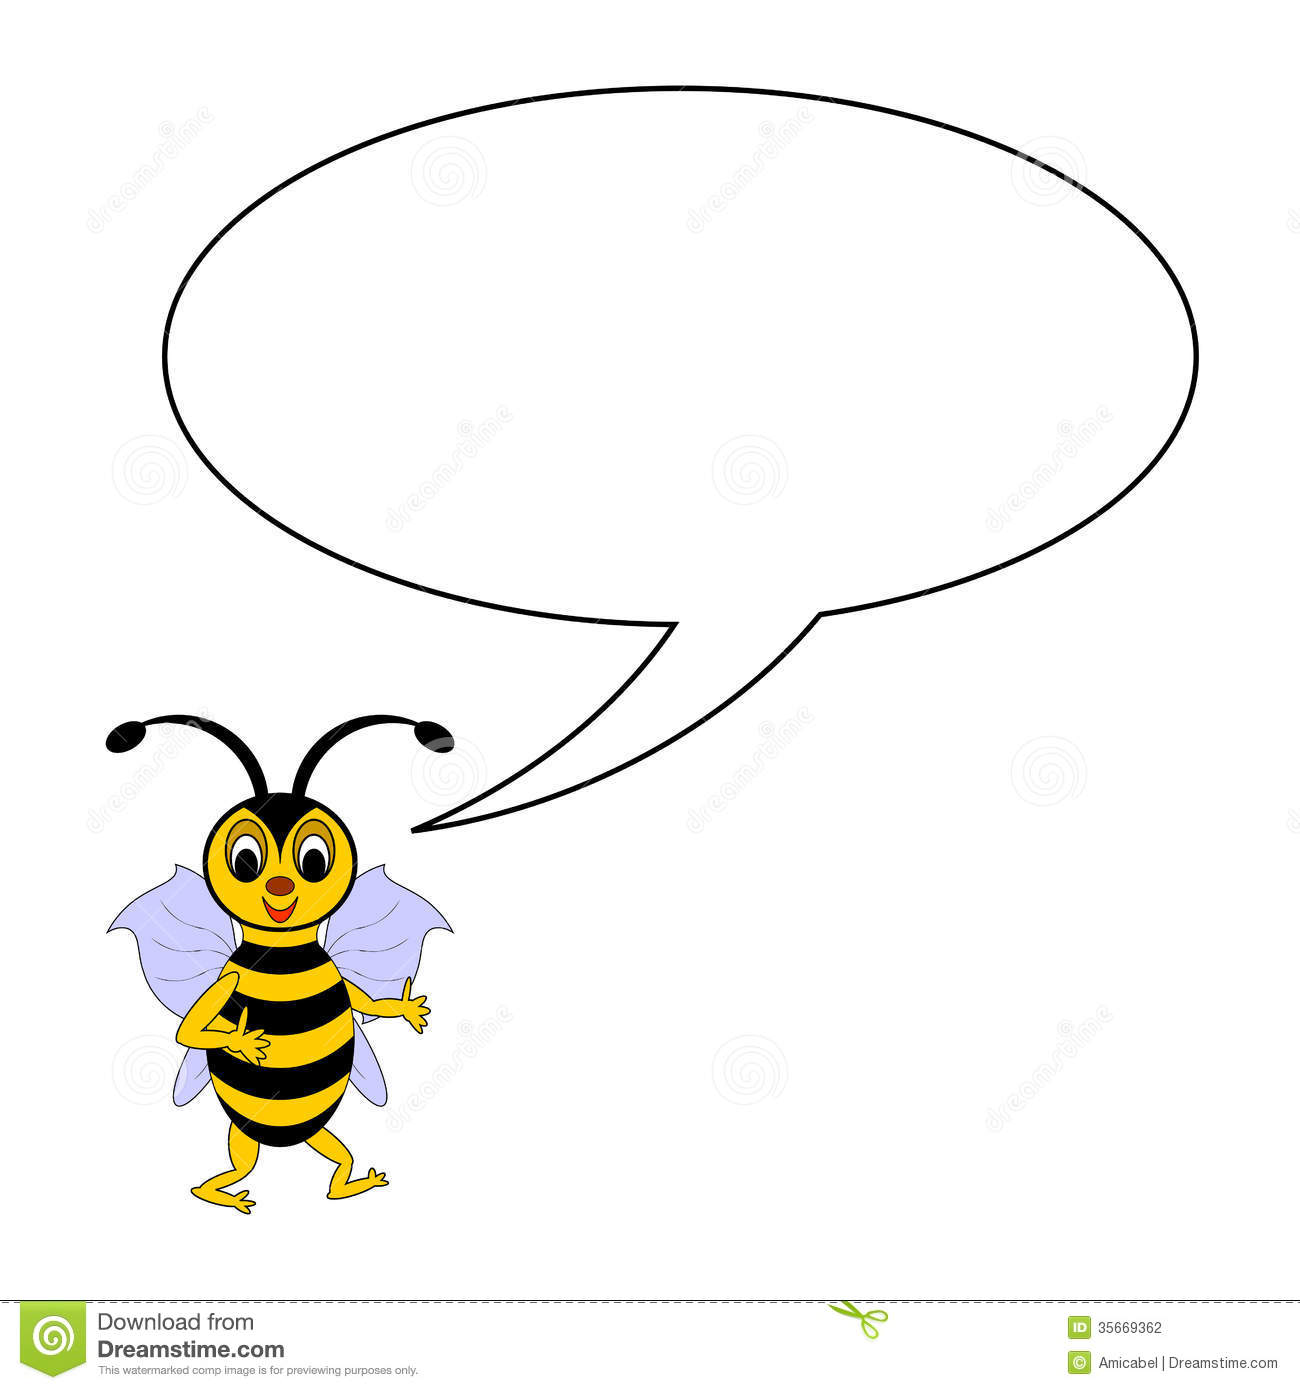 Funny Cartoon Bee With A Talking Bubble  Vector Art Illustration On